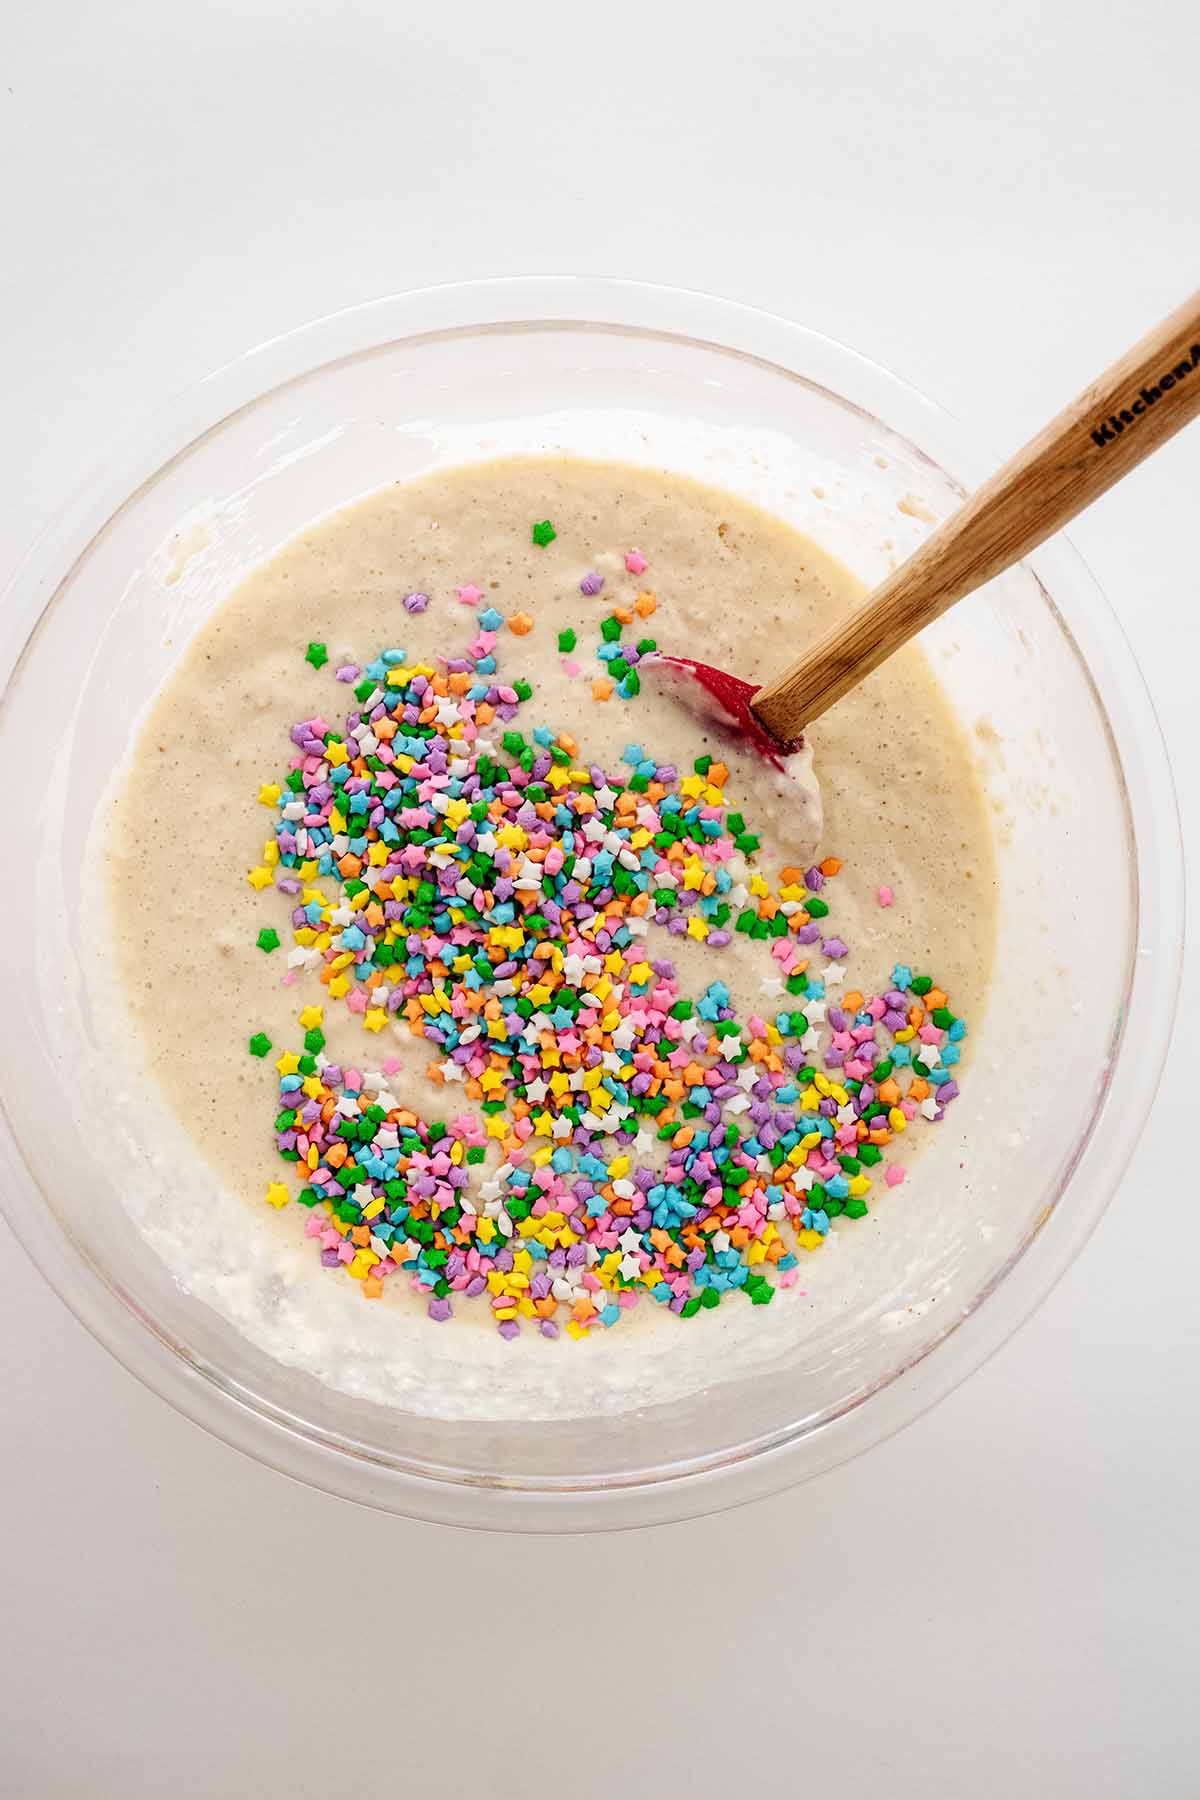 Batter and sprinkles in a large glass bowl